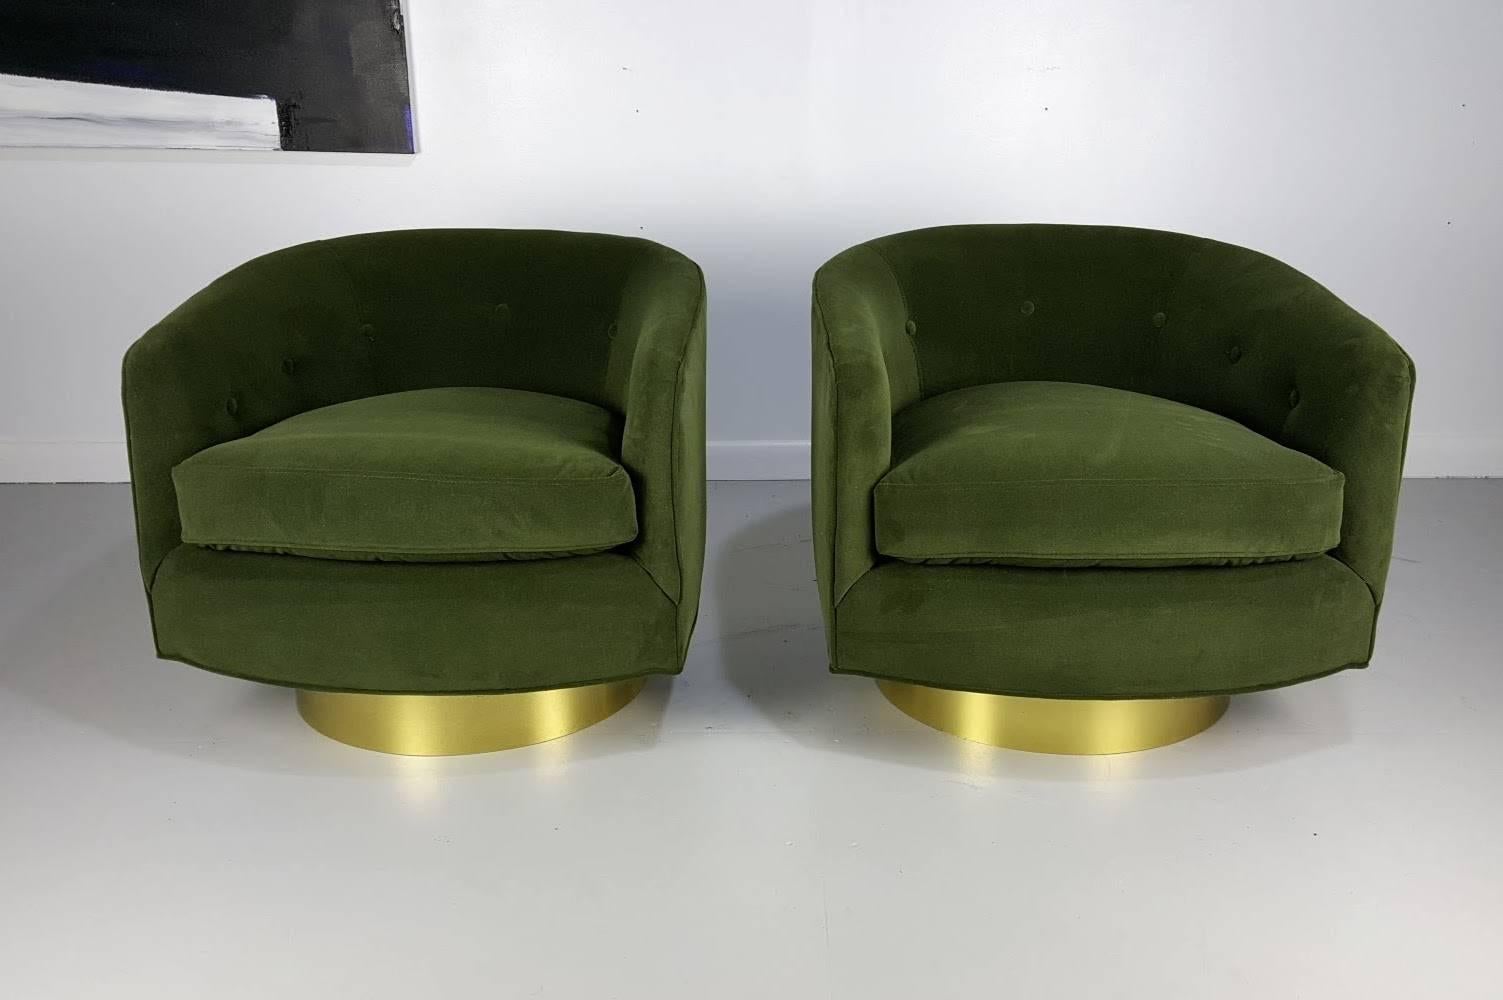 Mid-Century Modern Swivel Lounge Chairs in Velvet with Polished Brass Bases, style of Milo Baughman